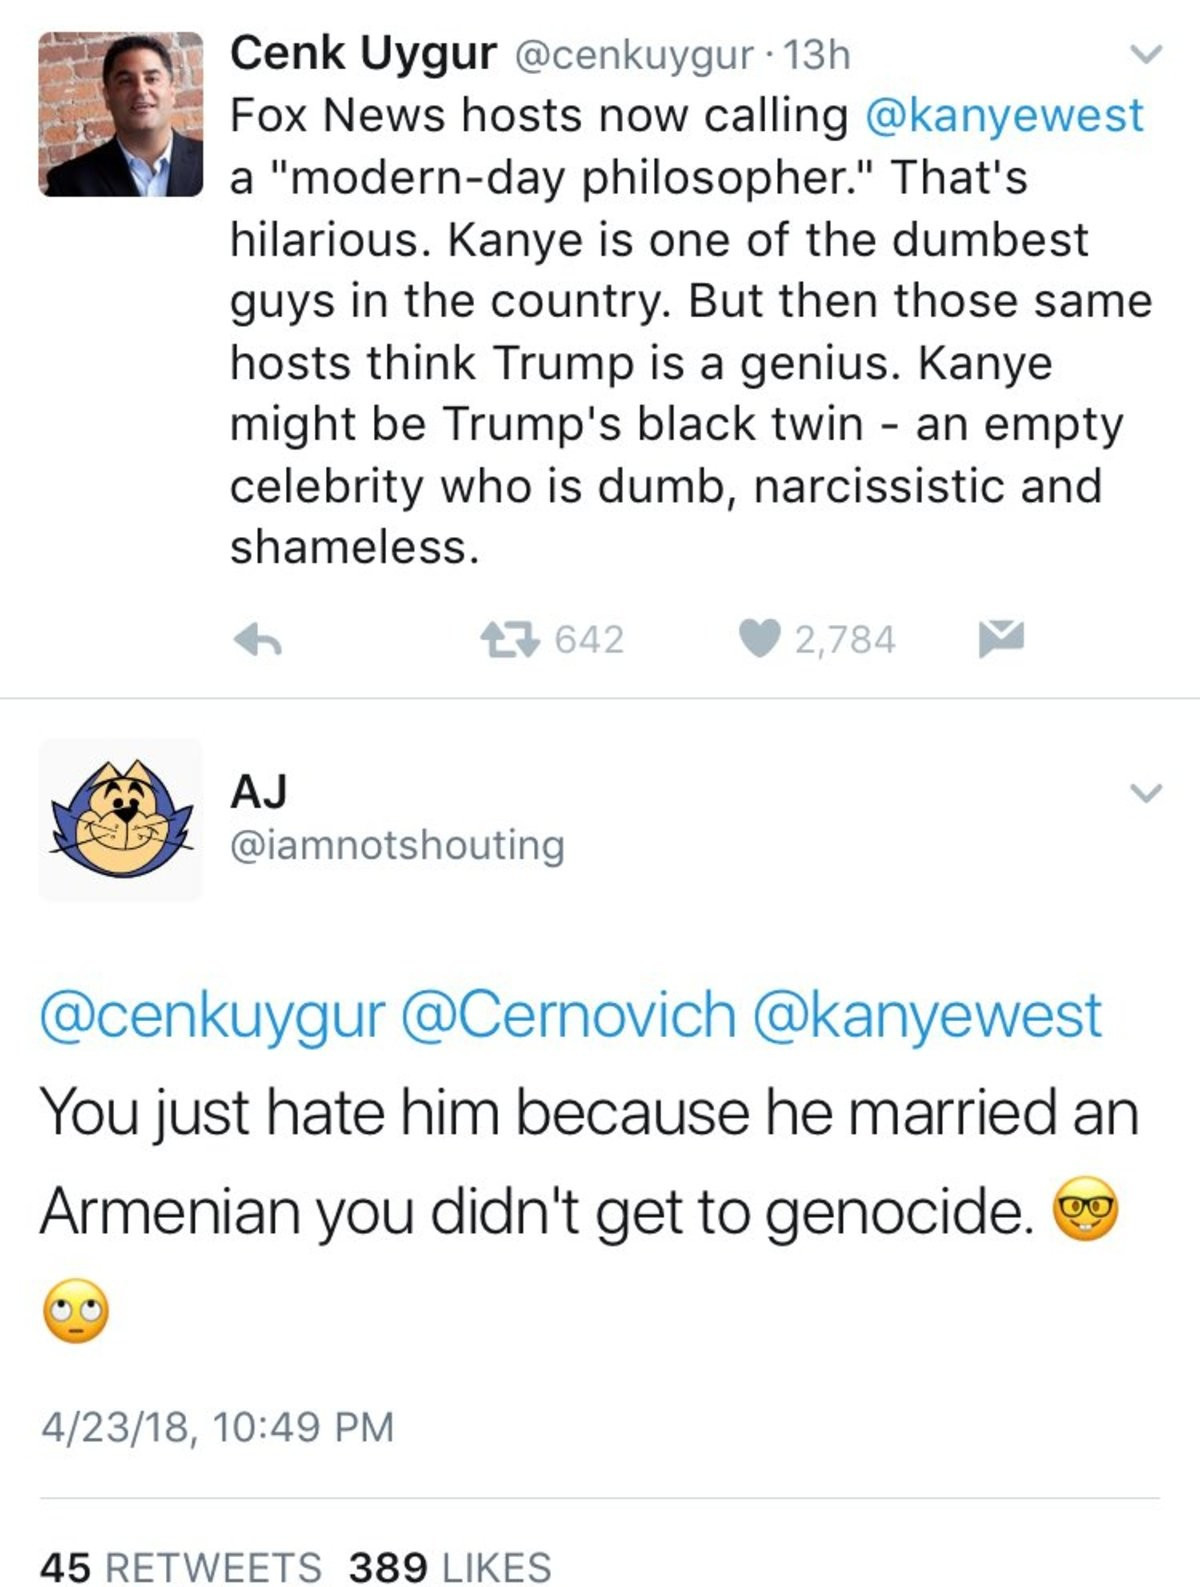 document - Cenk Uygur 13h Fox News hosts now calling a "modernday philosopher." That's hilarious. Kanye is one of the dumbest guys in the country. But then those same hosts think Trump is a genius. Kanye might be Trump's black twin an empty celebrity who 